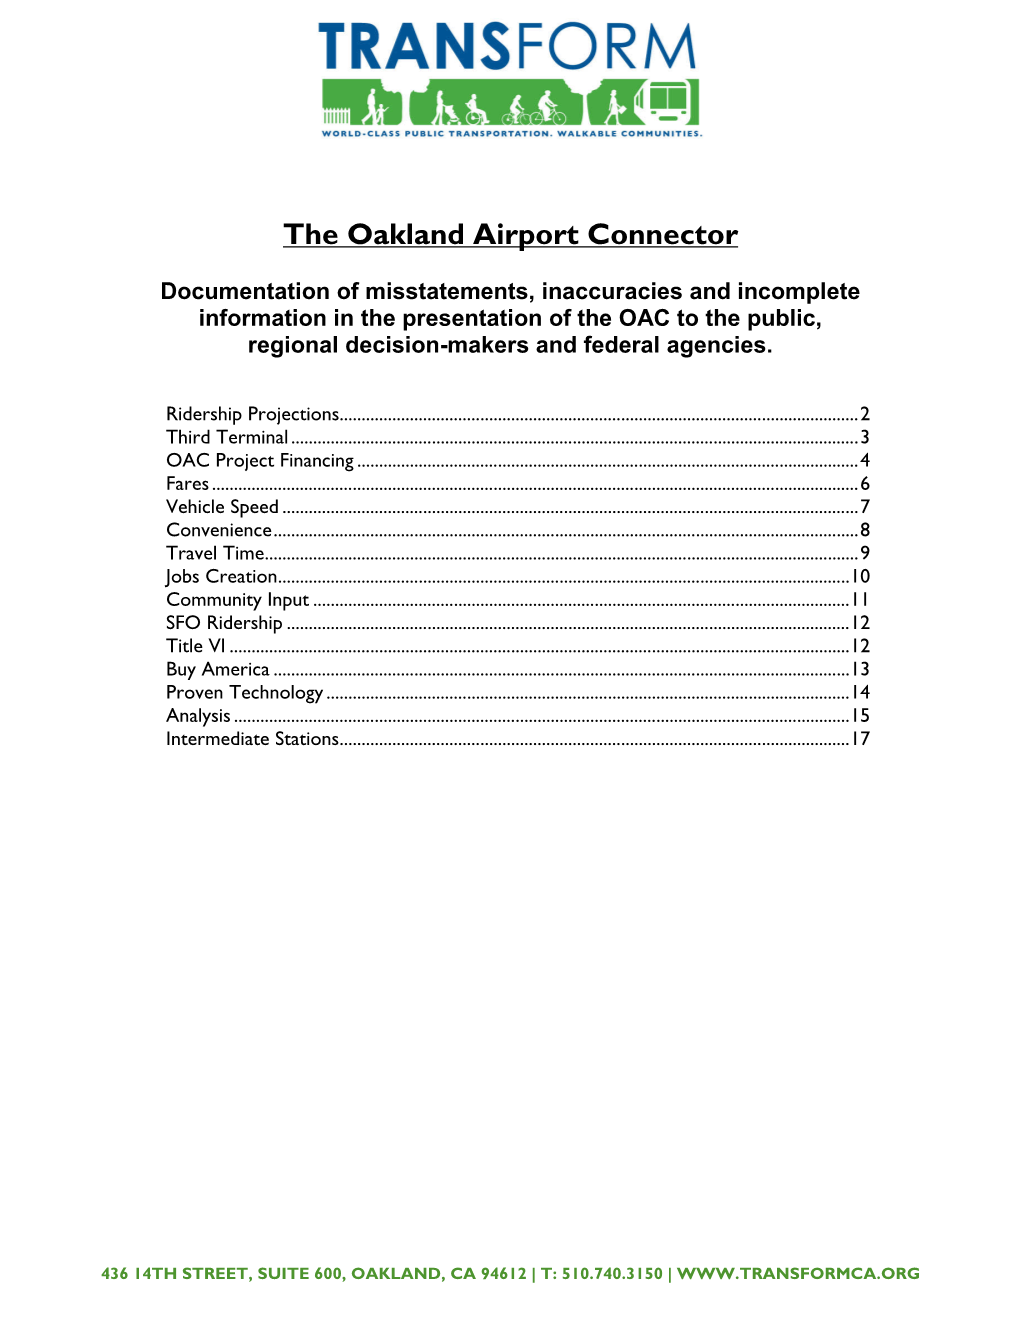 The Oakland Airport Connector